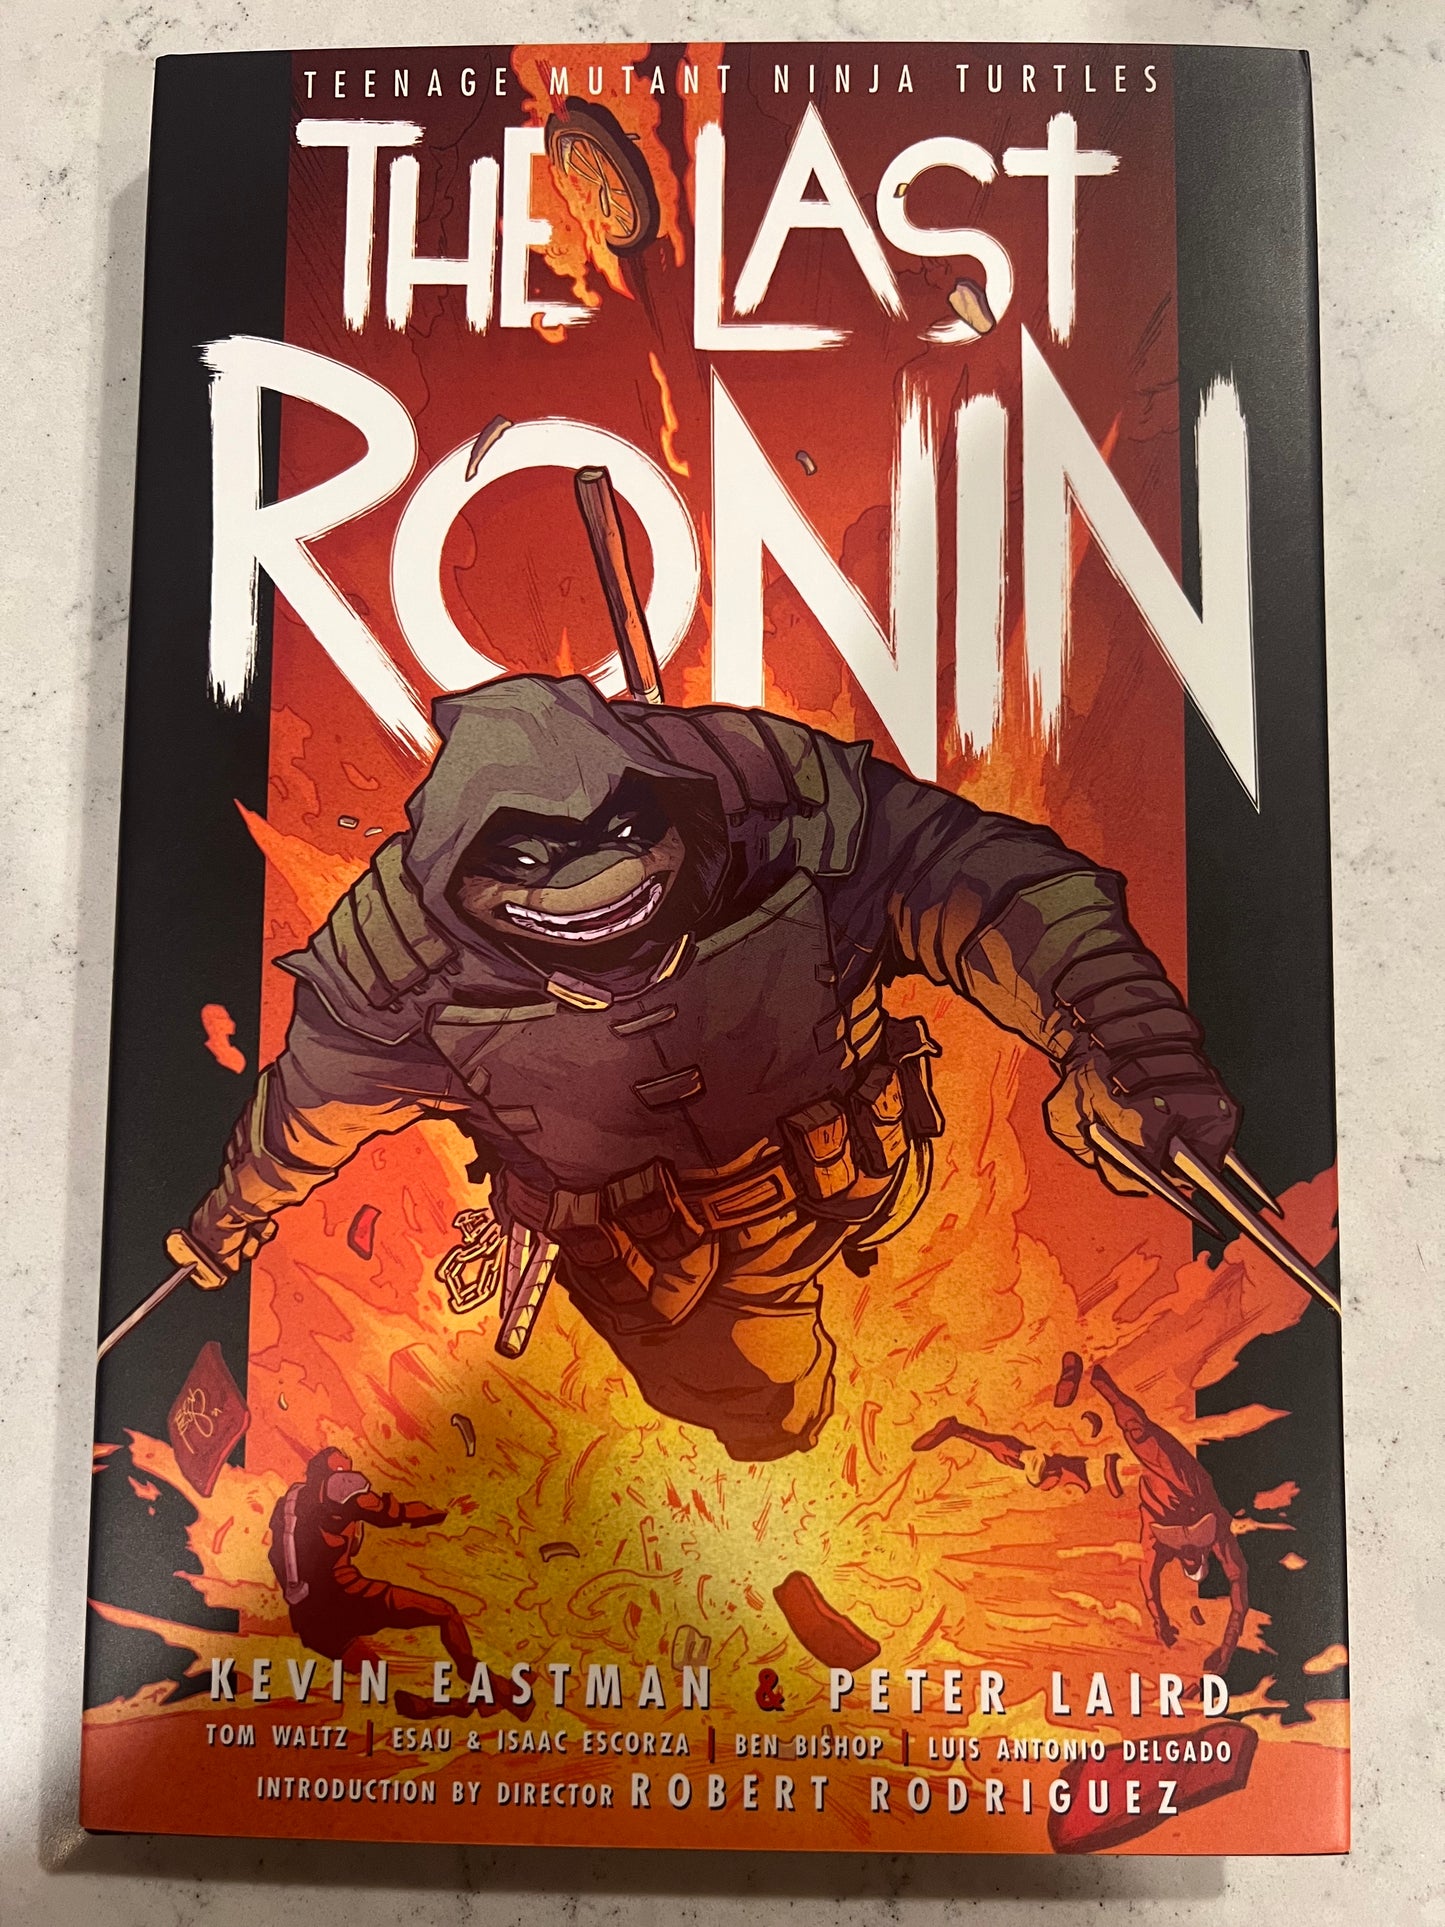 Teenage Mutant Ninja Turtles: The Last Ronin Hardcover (Collecting 1-5) SDCC 2022 Exclusive Signed by Kevin Eastman and Peter Laird